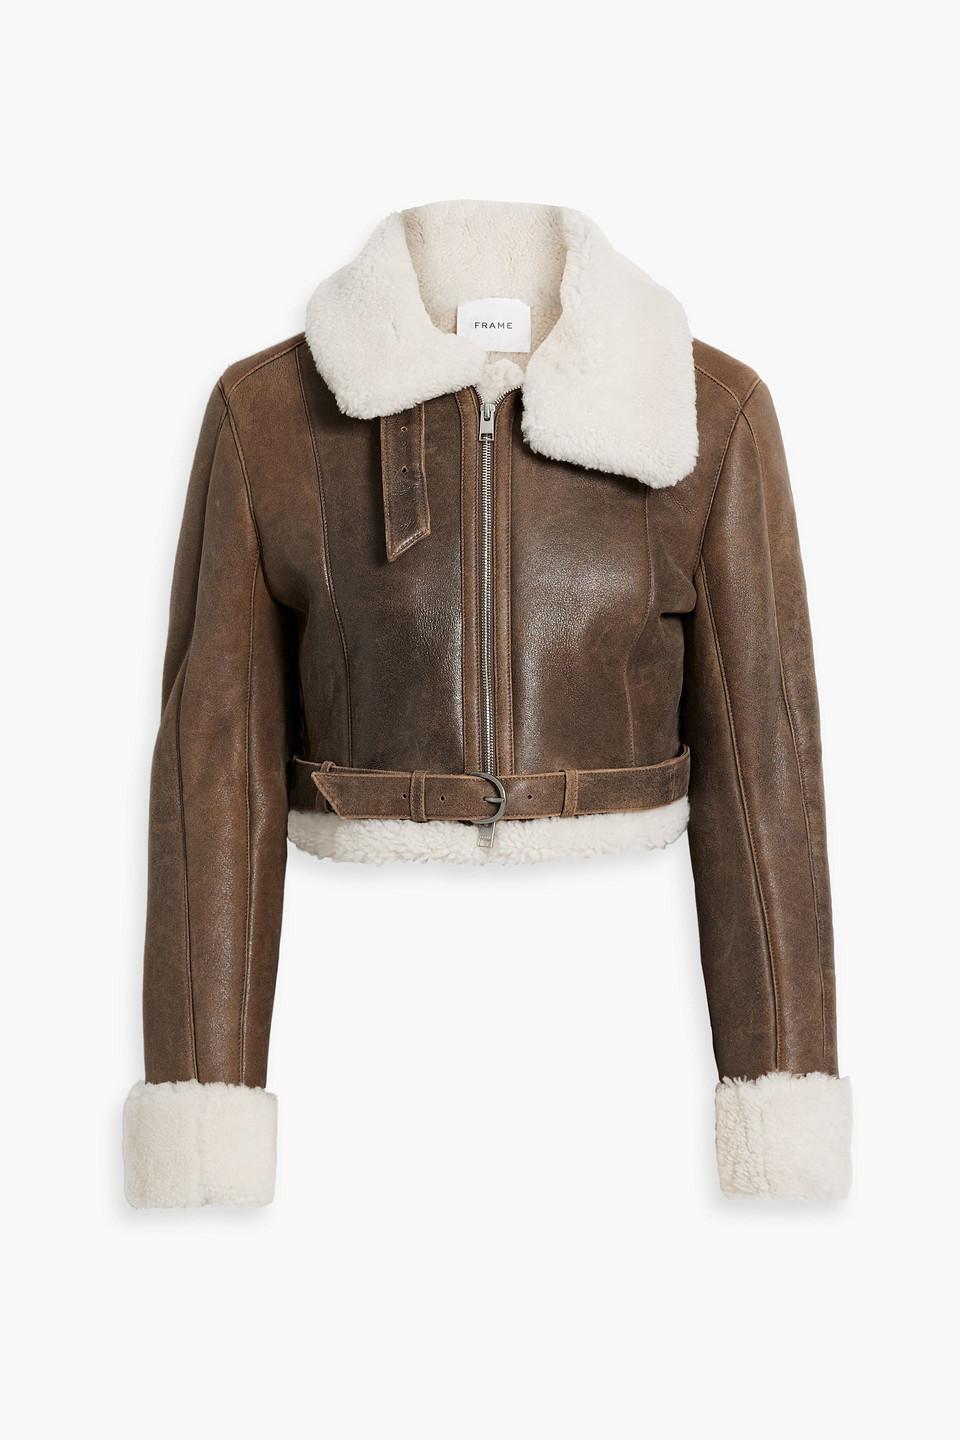 FRAME Cropped Shearling Jacket in Brown | Lyst